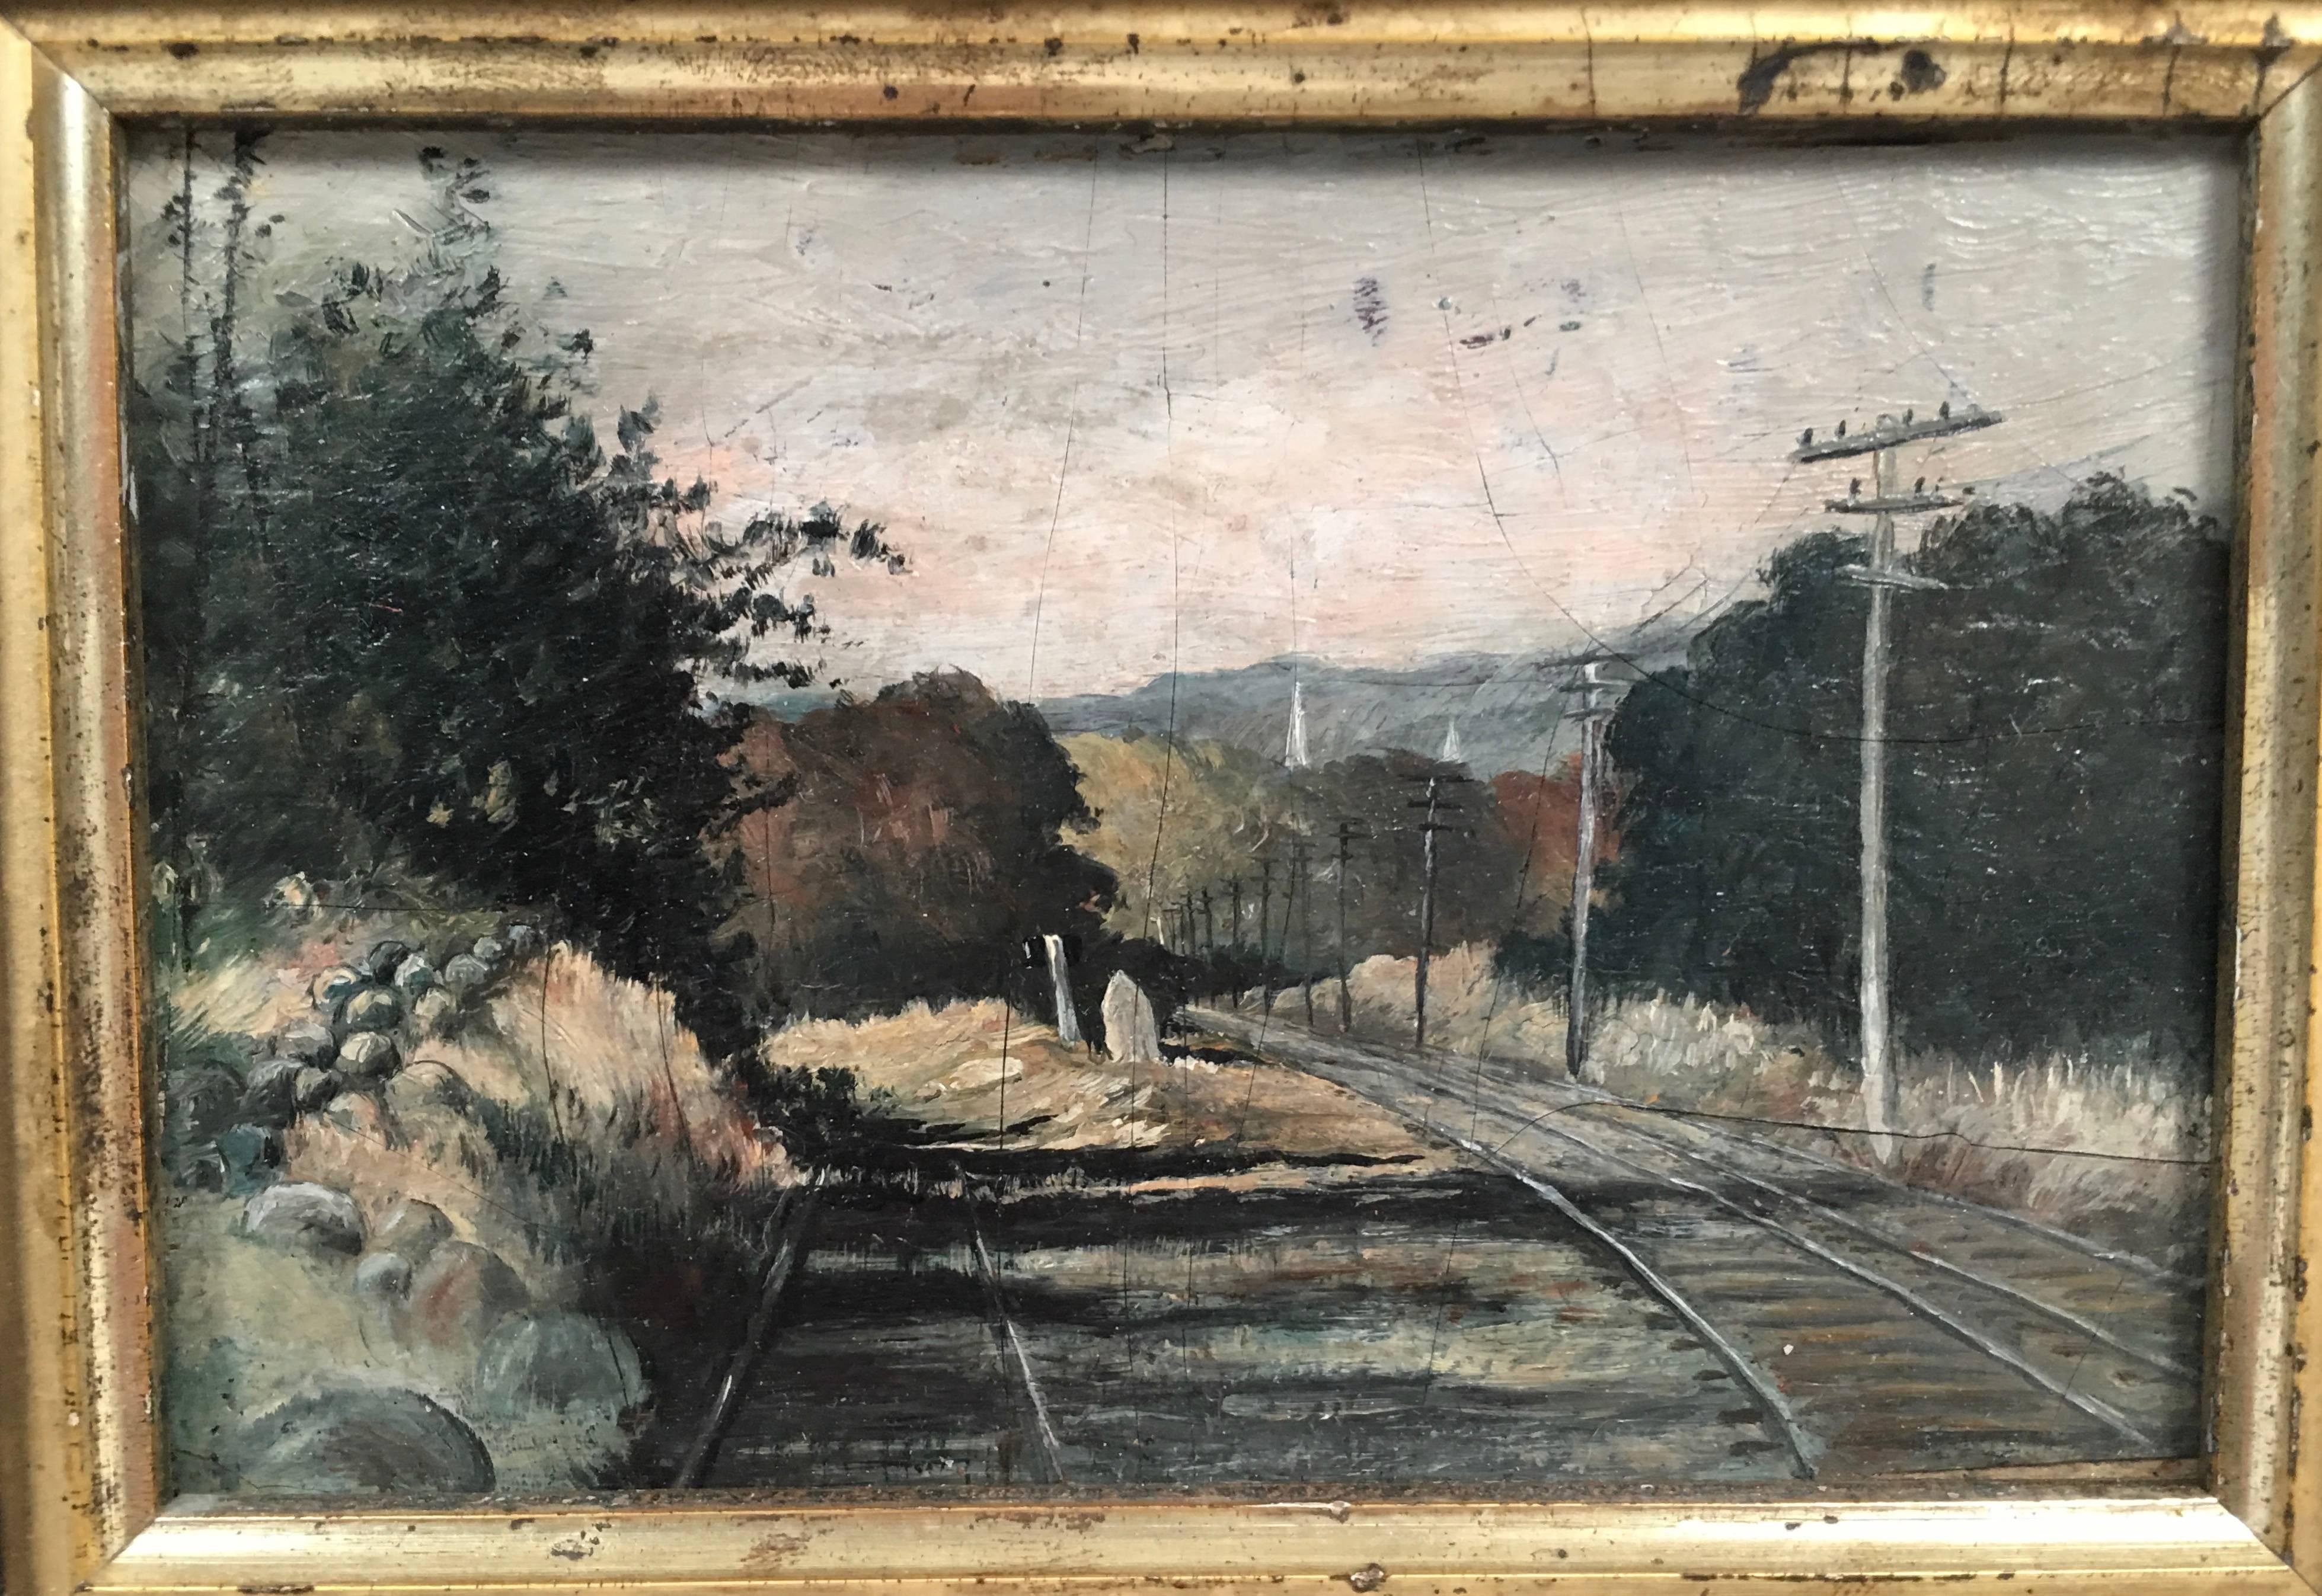 A beautifully rendered, unusual small, late  19th century oil on board painting depicting railroad tracks and telegraph poles in a rural setting with mountains and a church spire in the background, in its original ebonized oak frame with gilded